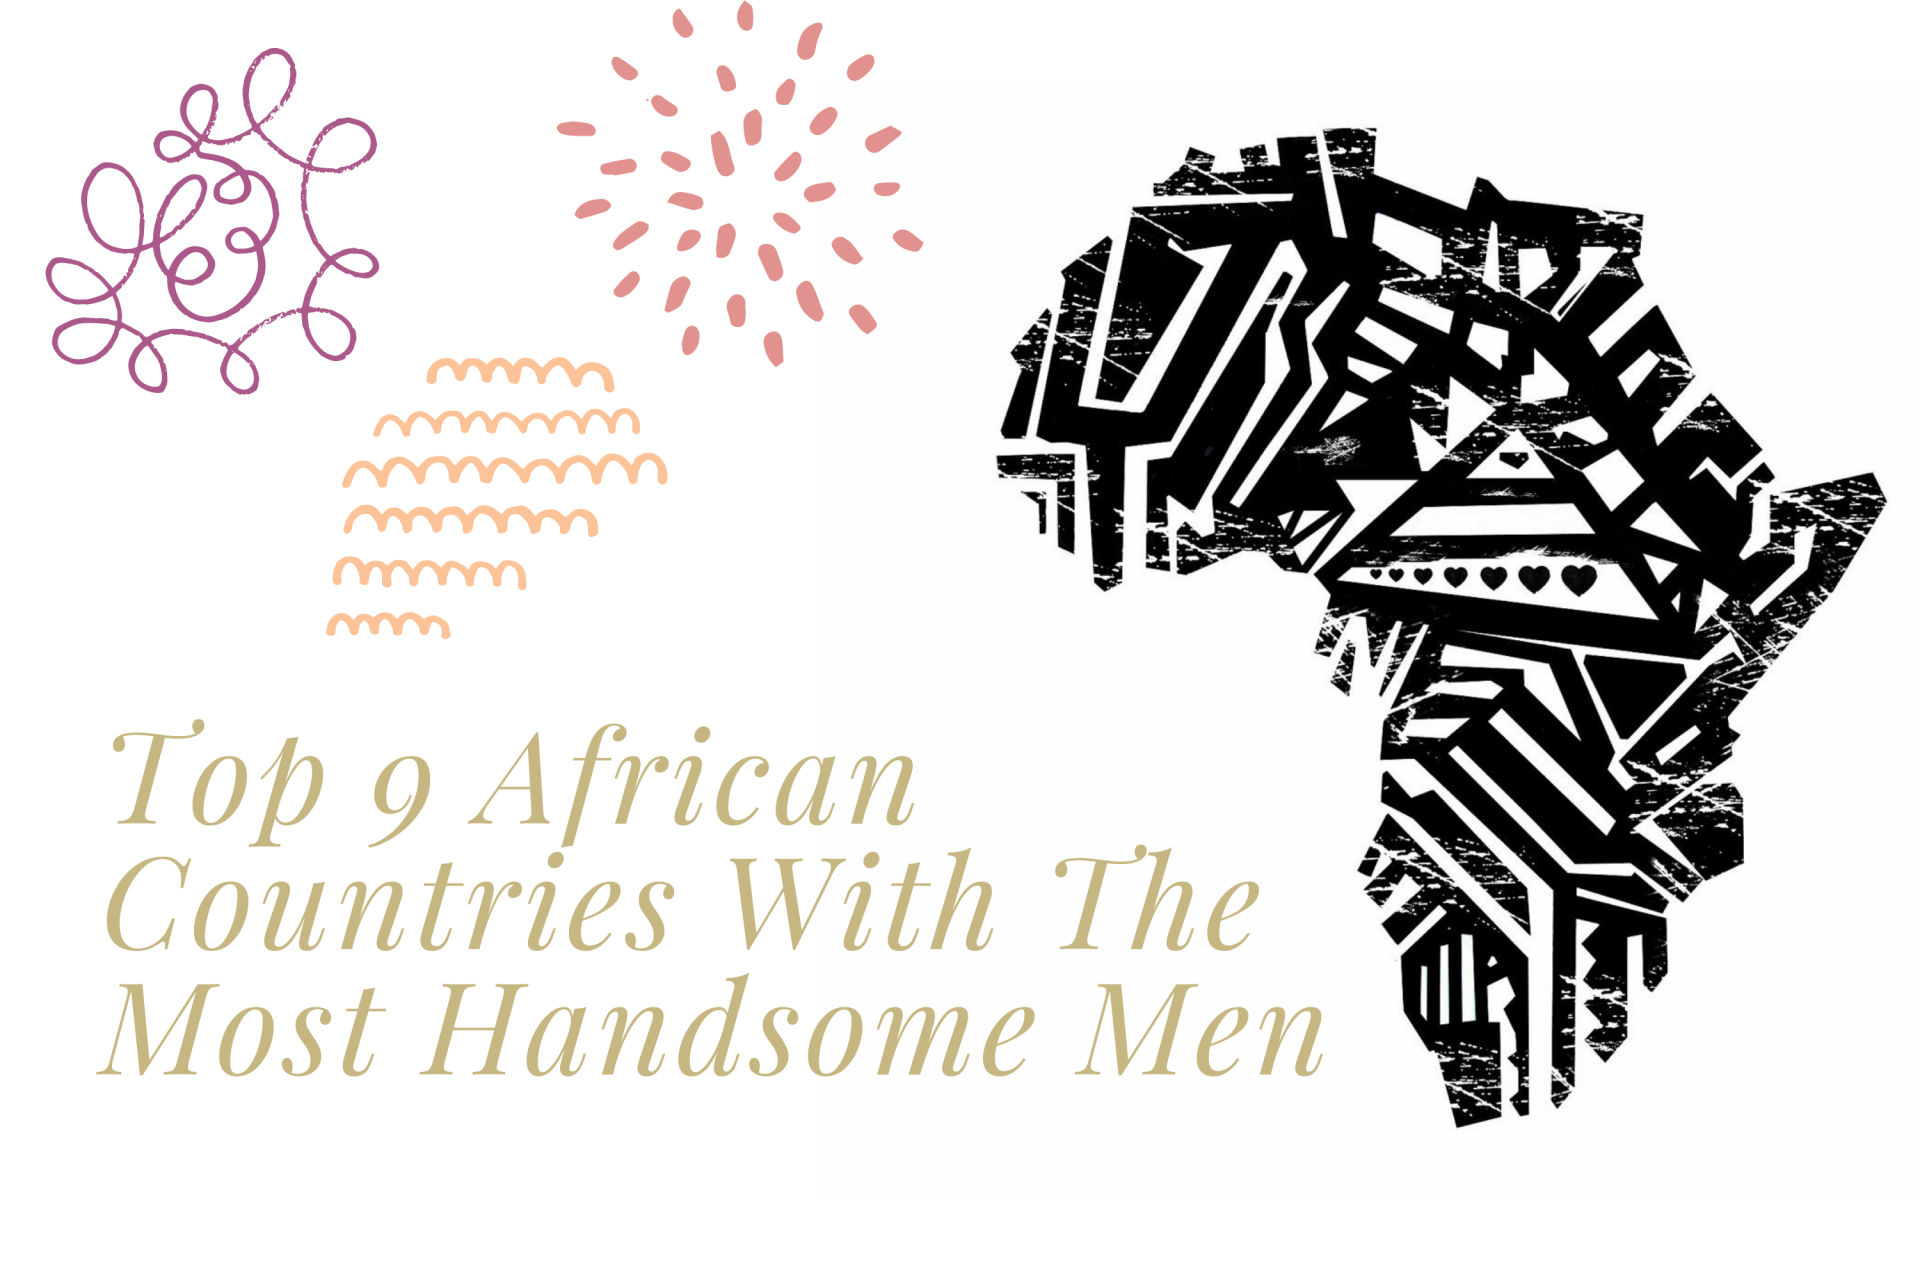 Top 9 African Countries With The Most Handsome Men